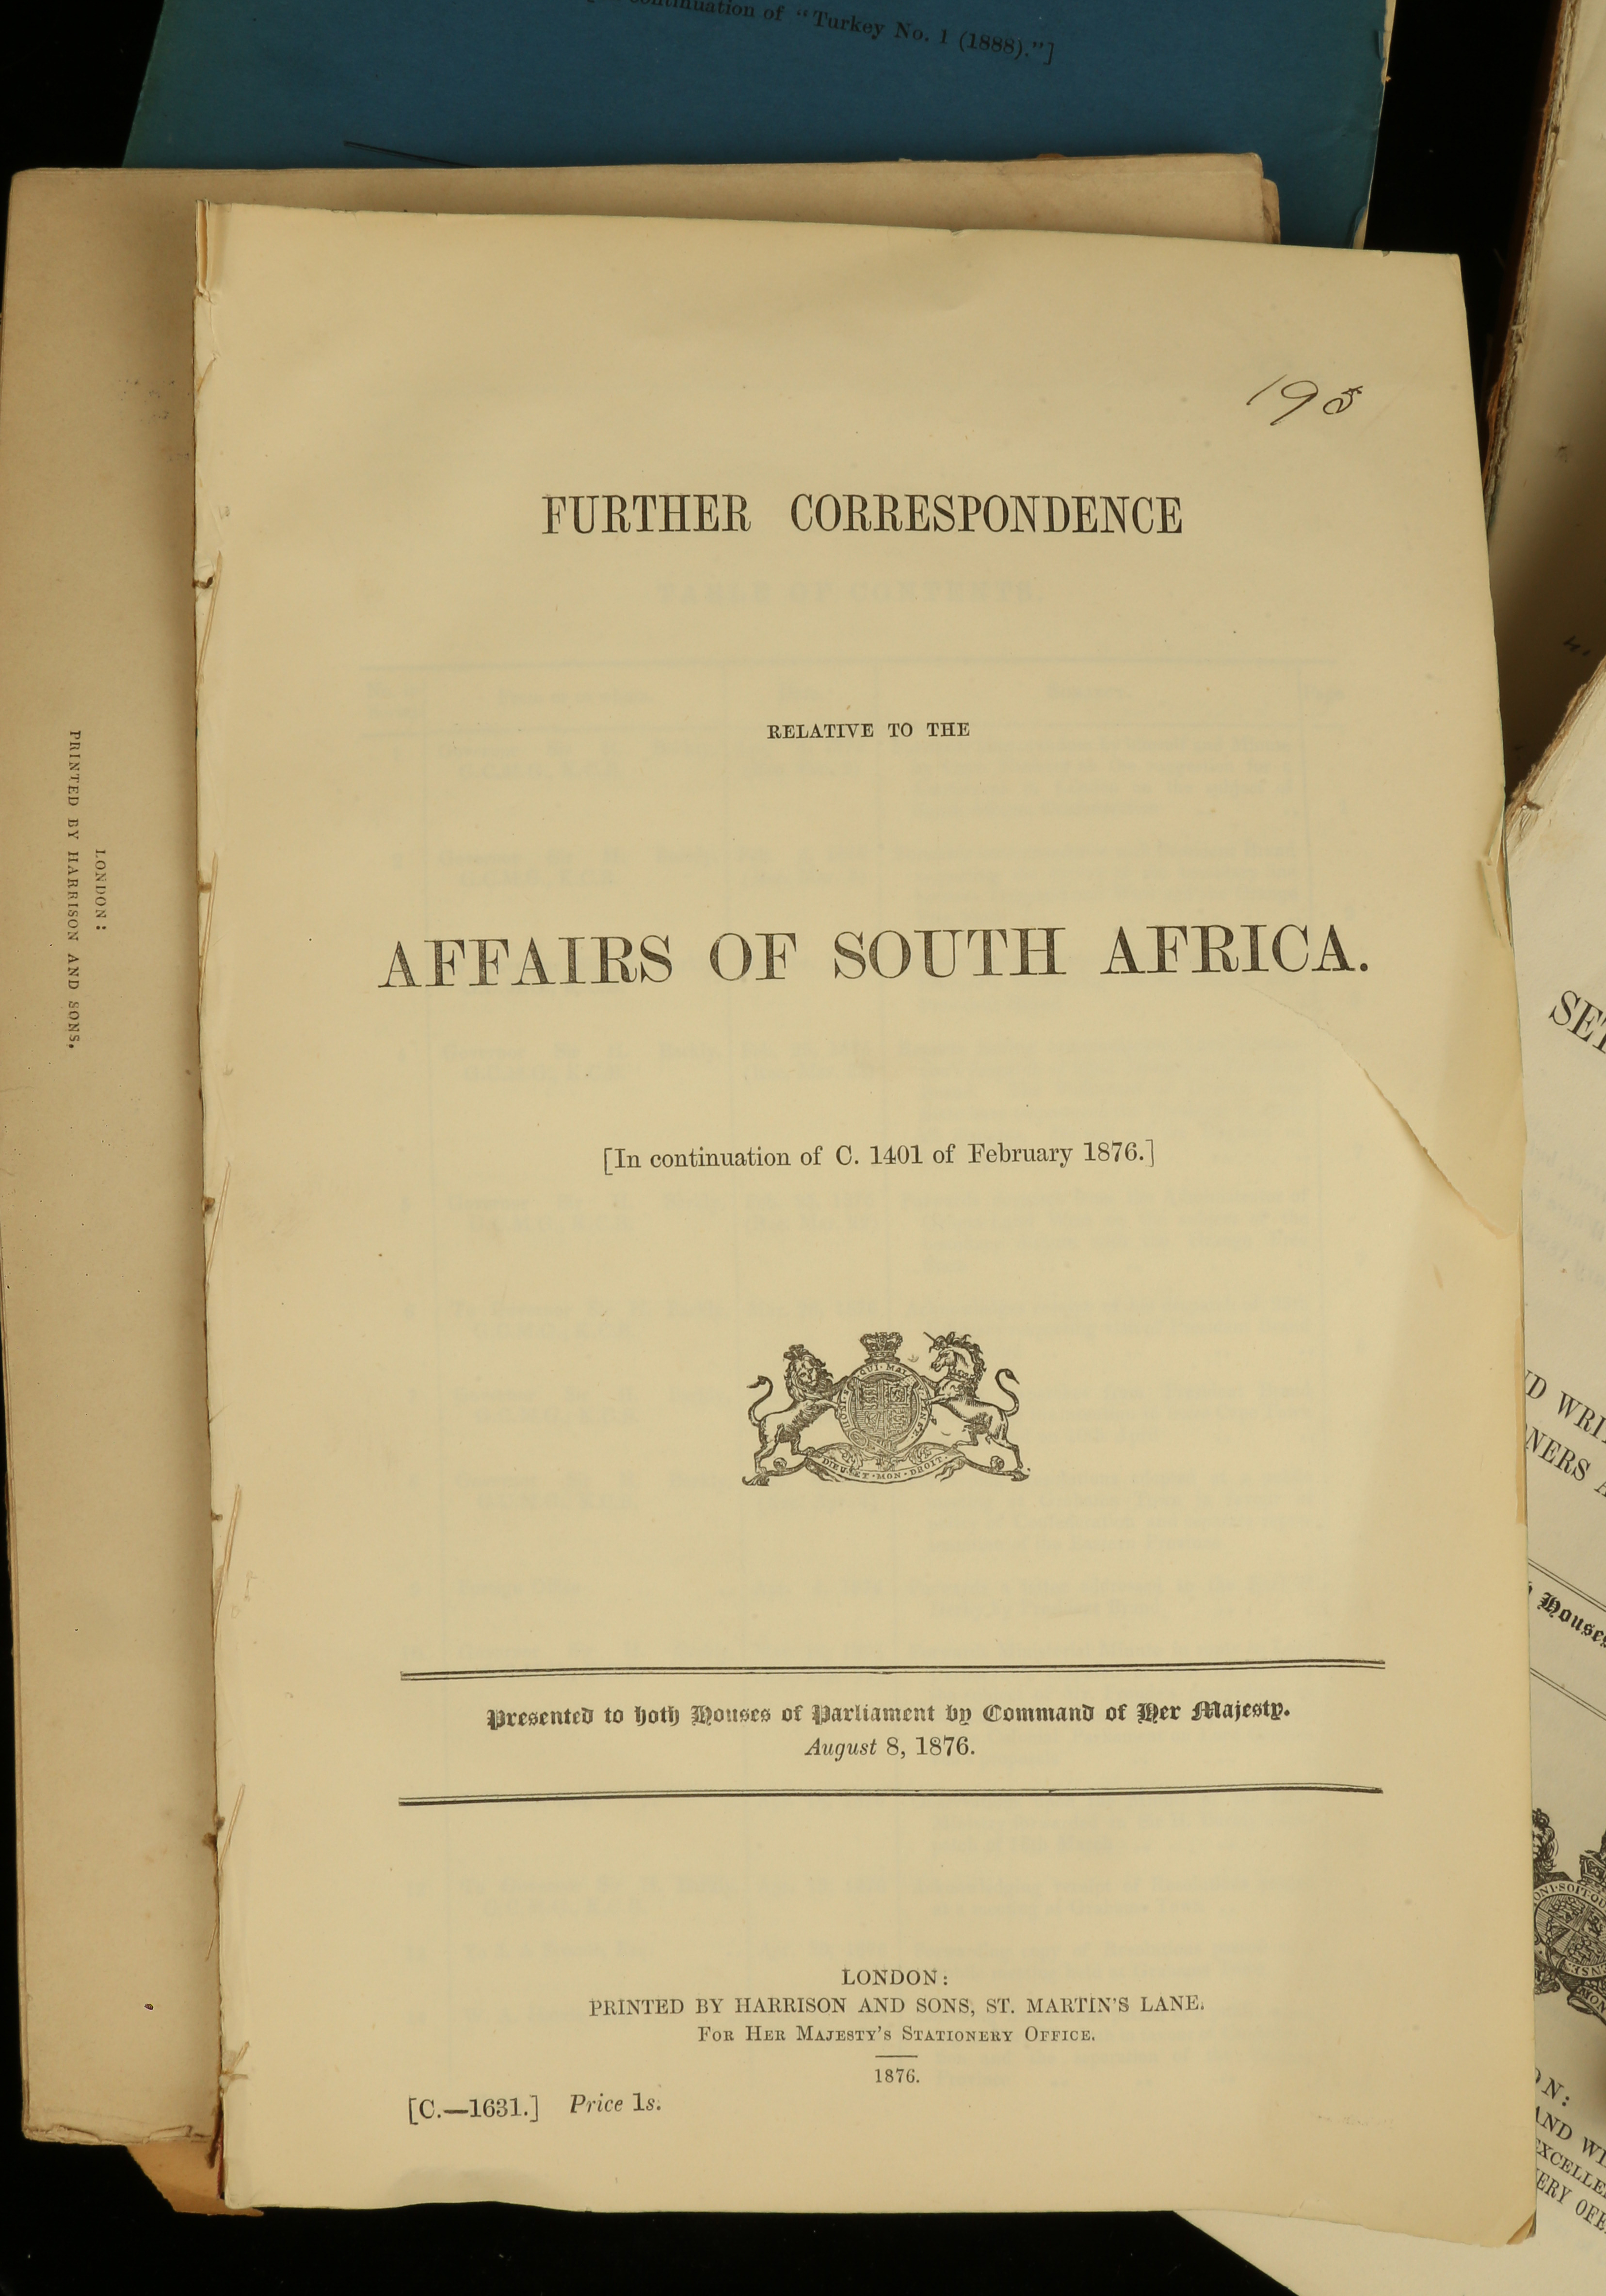 INDIA & SOUTH AFRICA - Statement of the Trade of British India with British Possessions and - Image 2 of 5